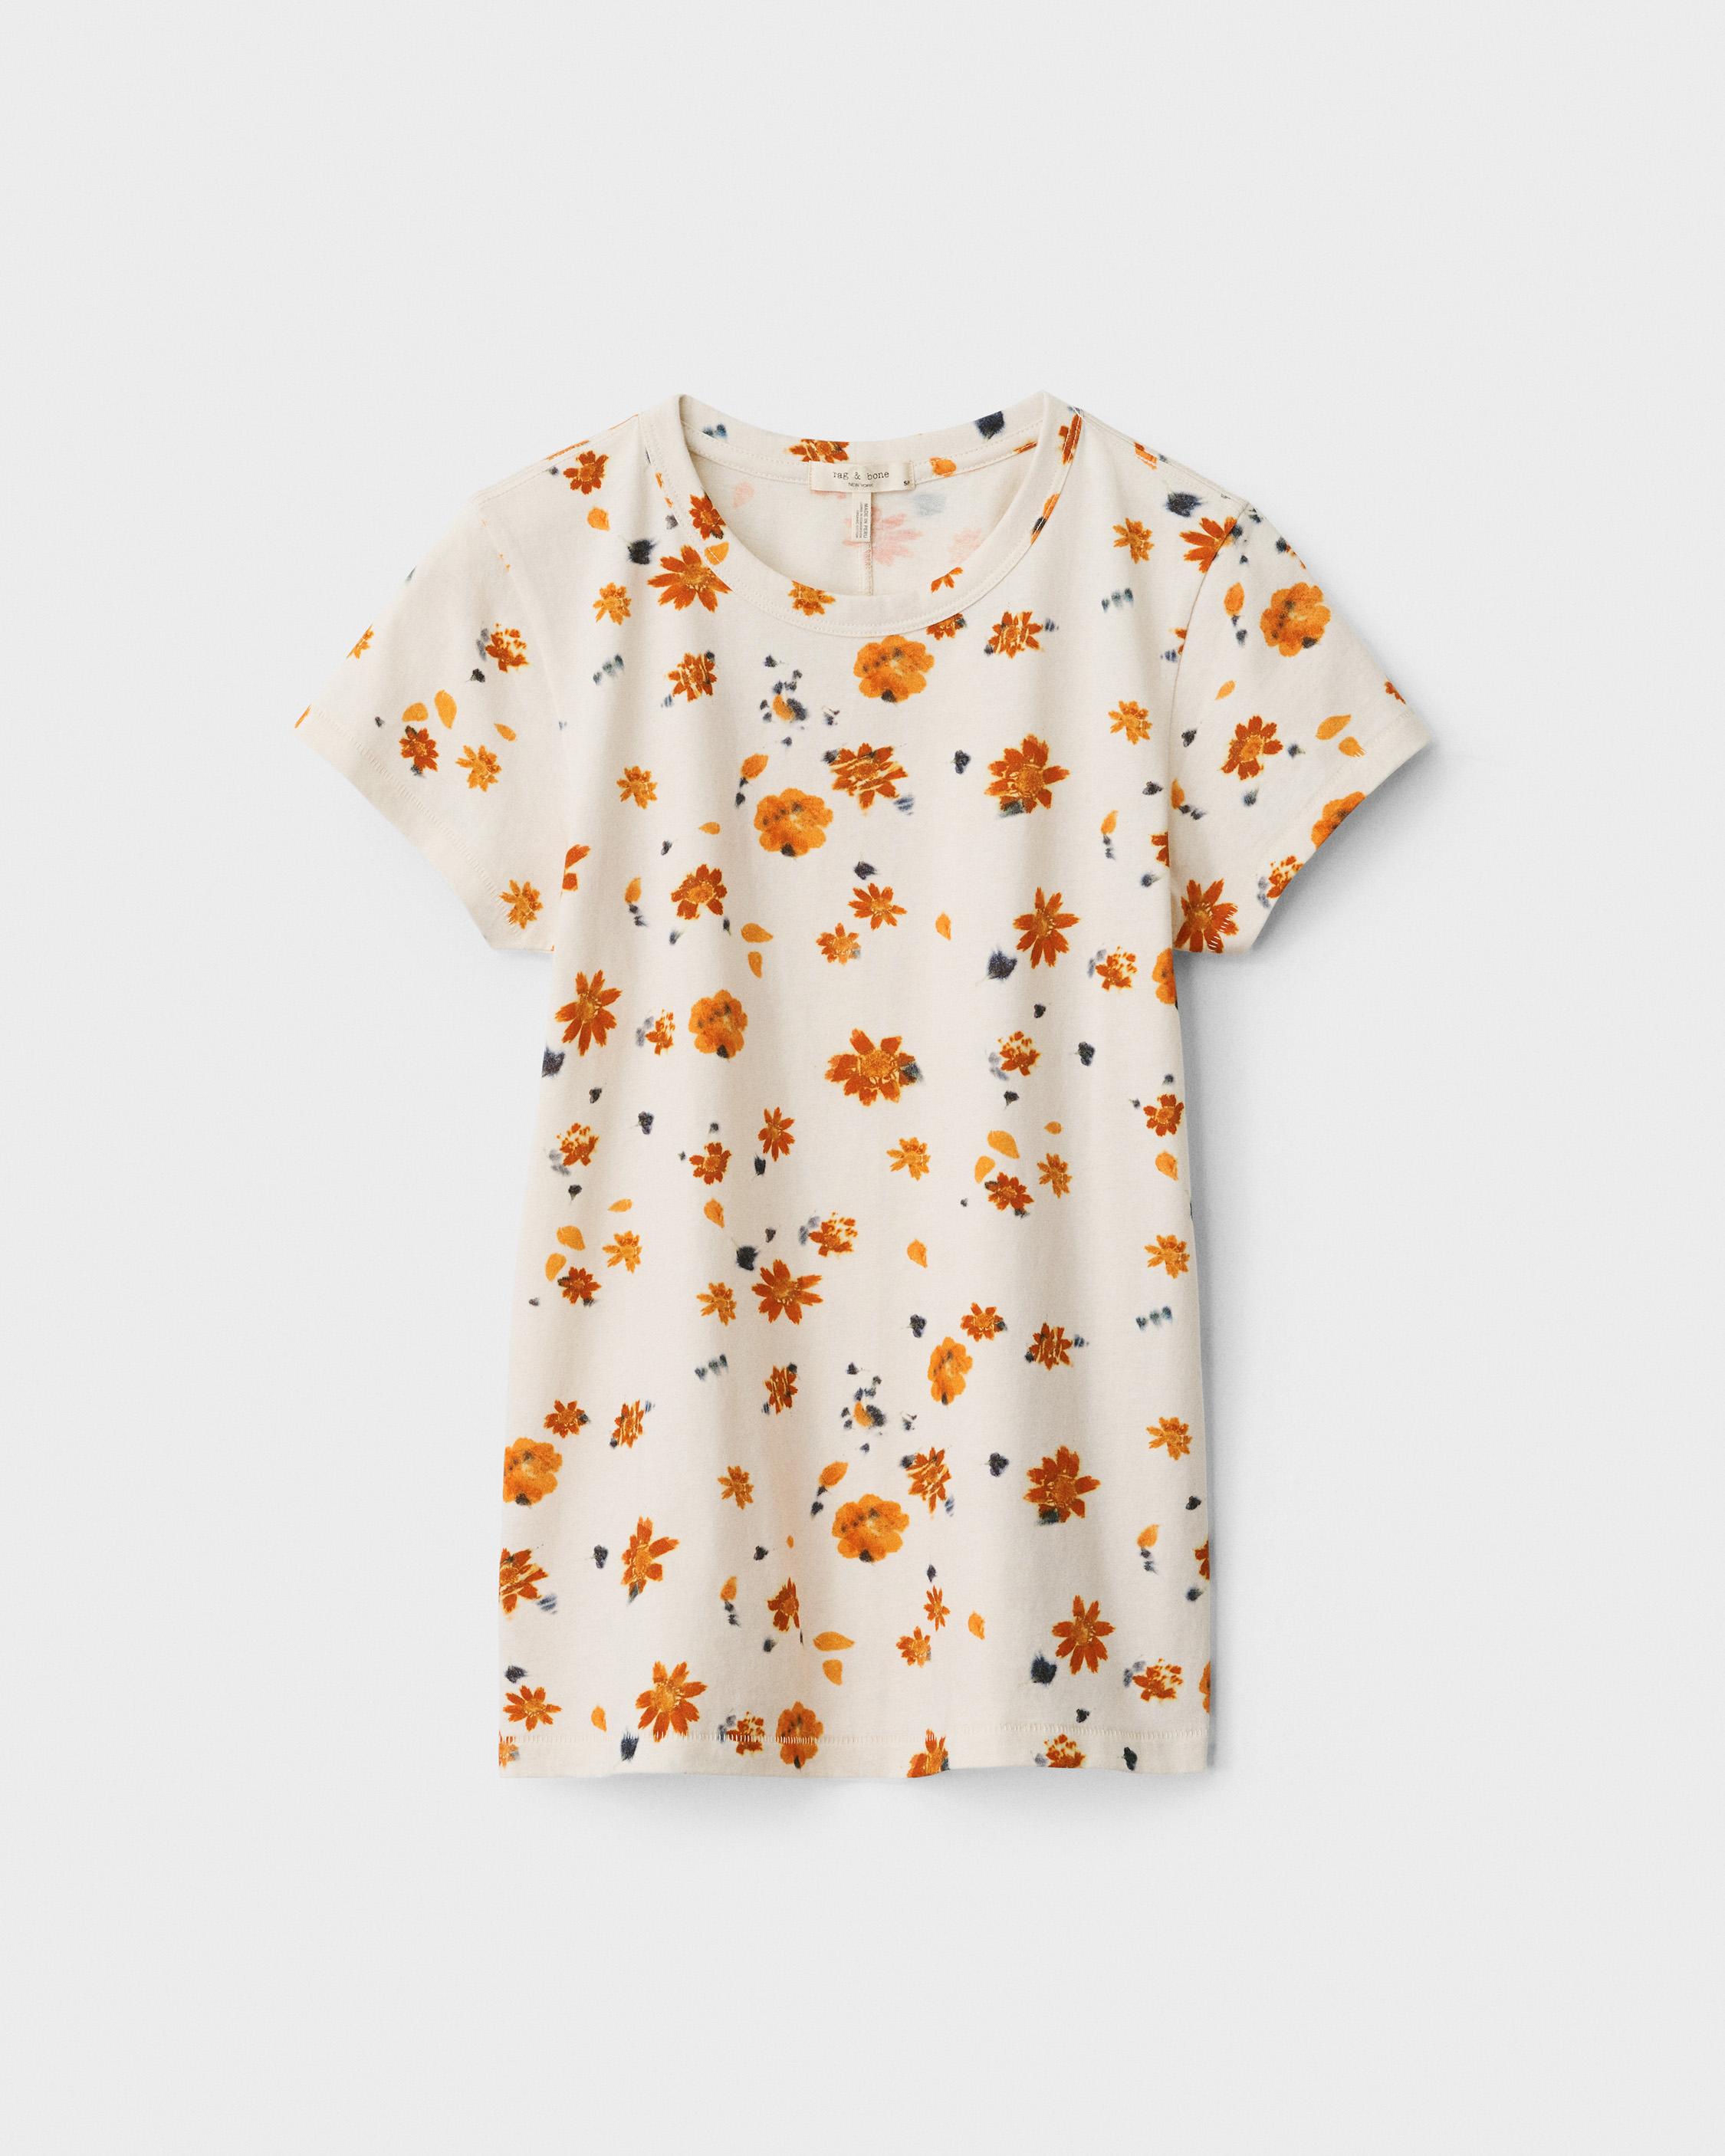 Ivory - | & rag Over Tee All bone Floral